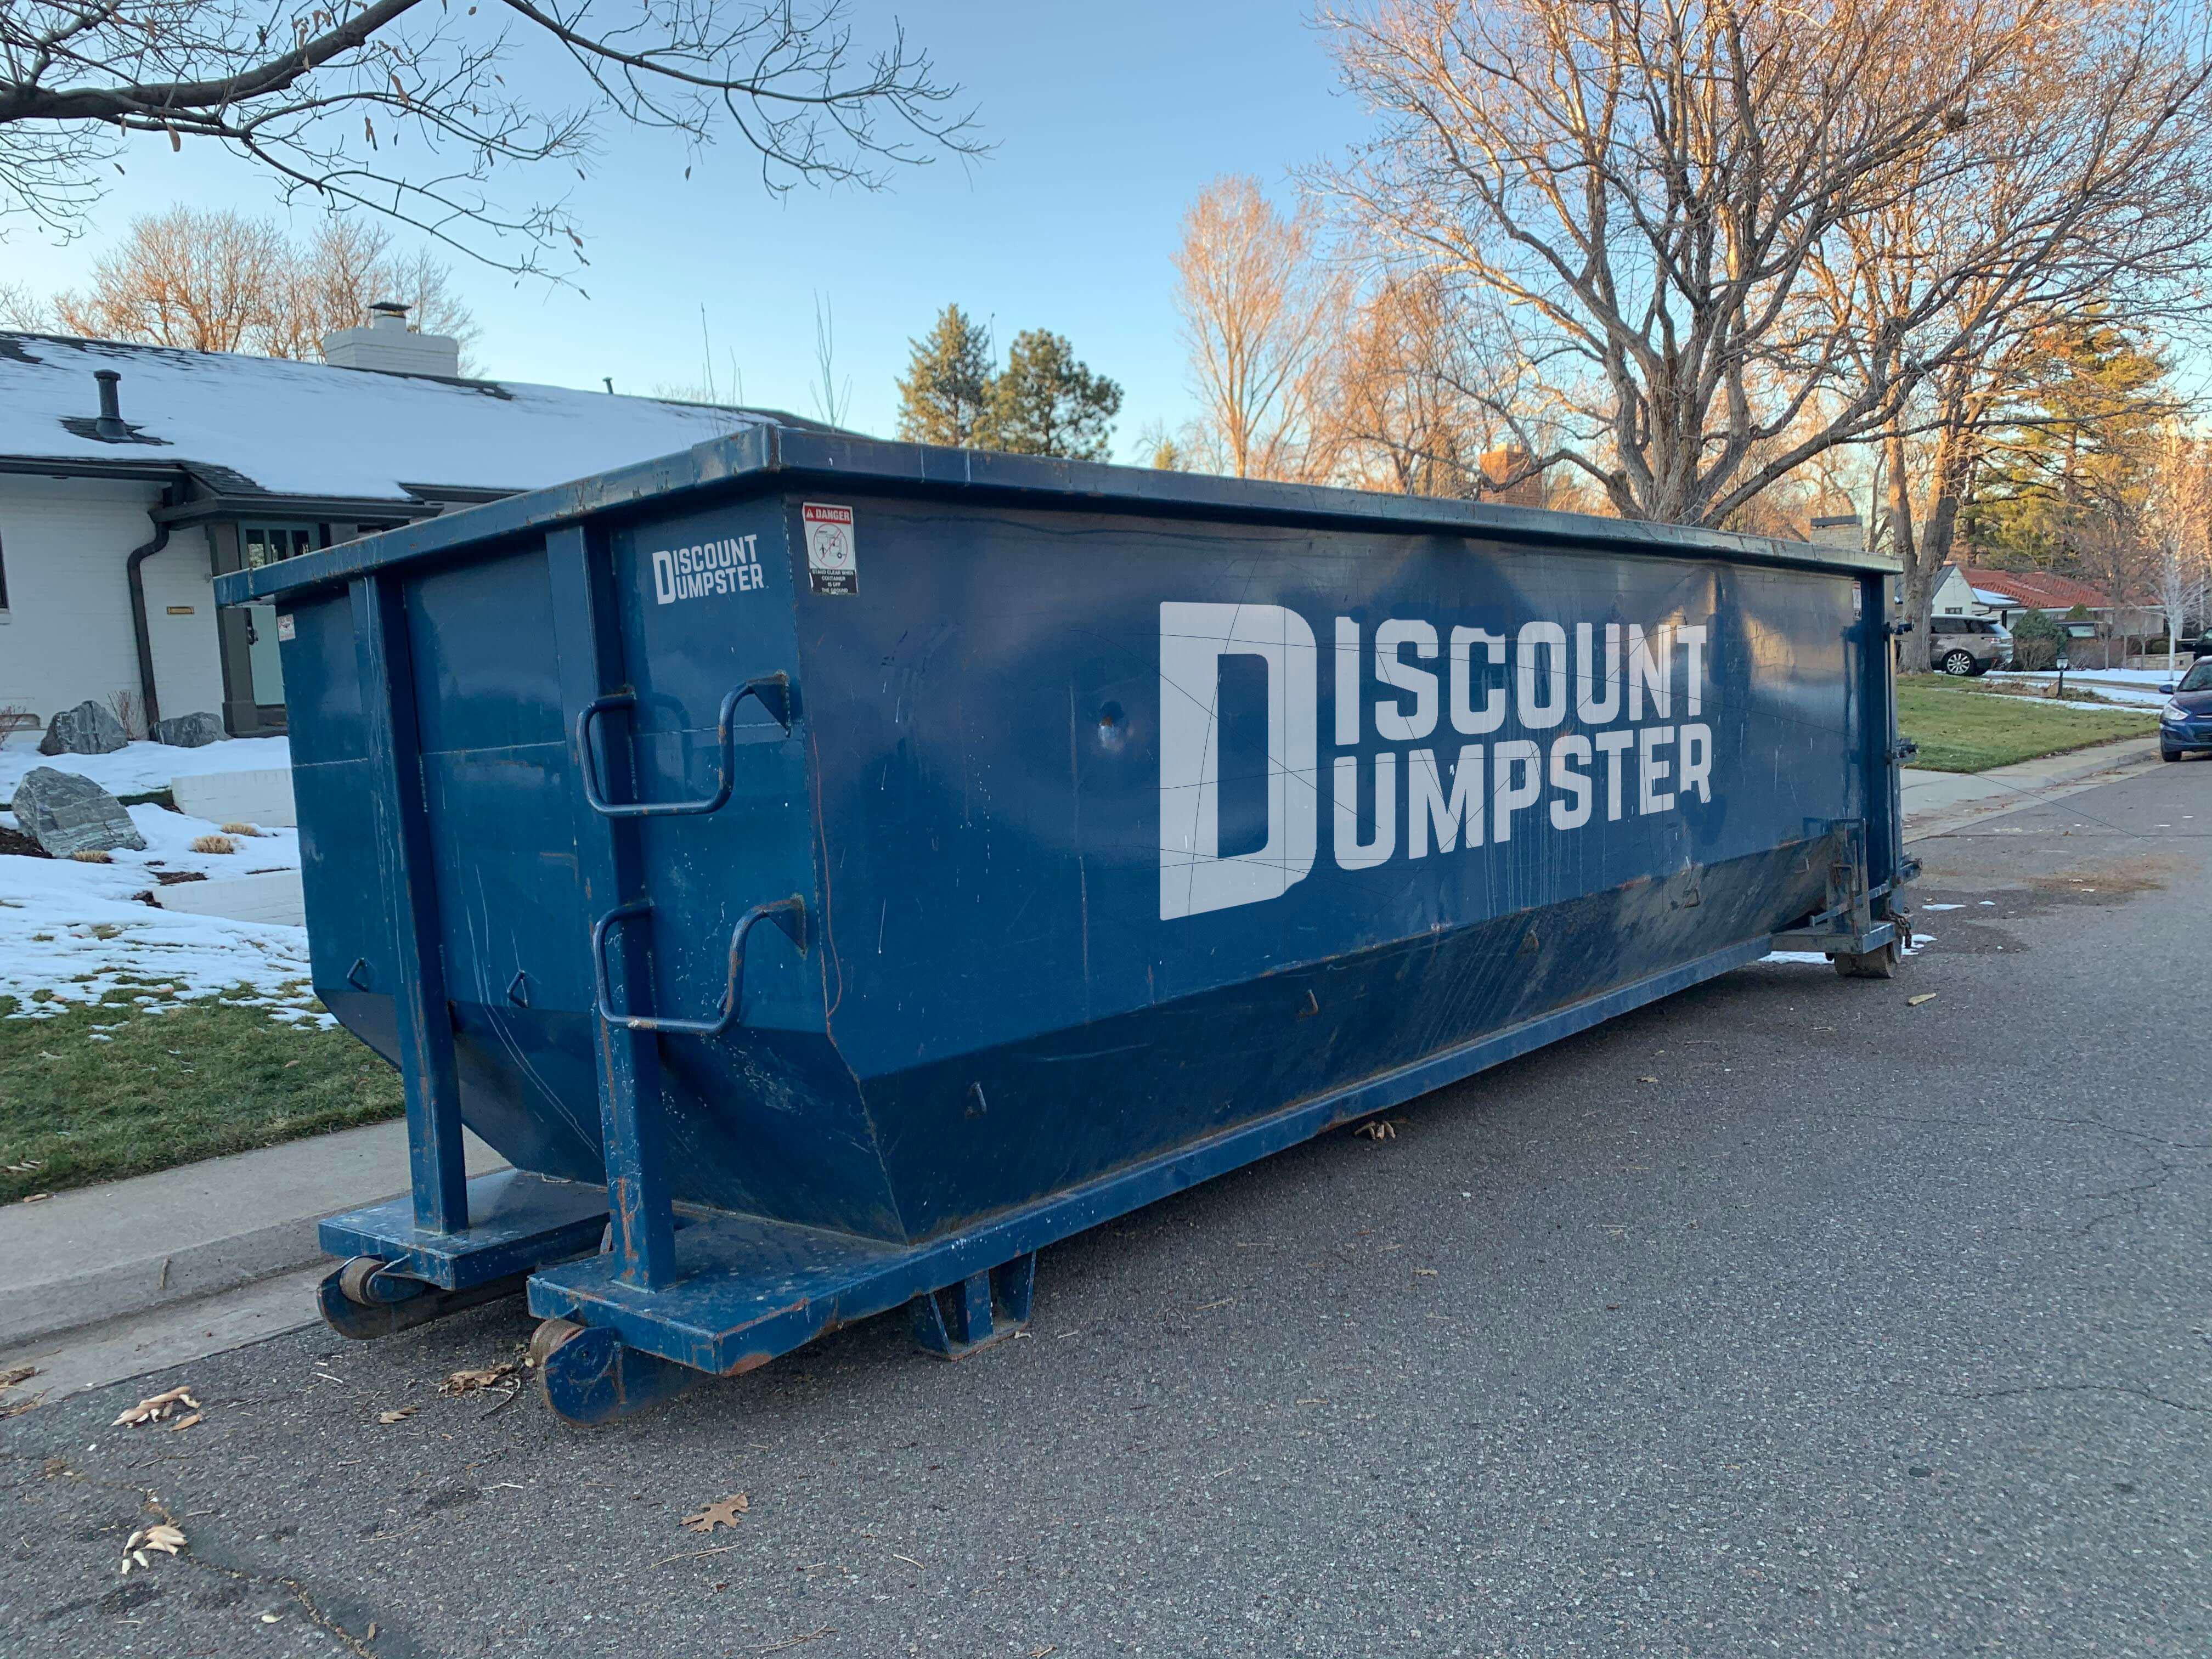 Discount dumpster roll off dumpsters can go anywhere in chicago il